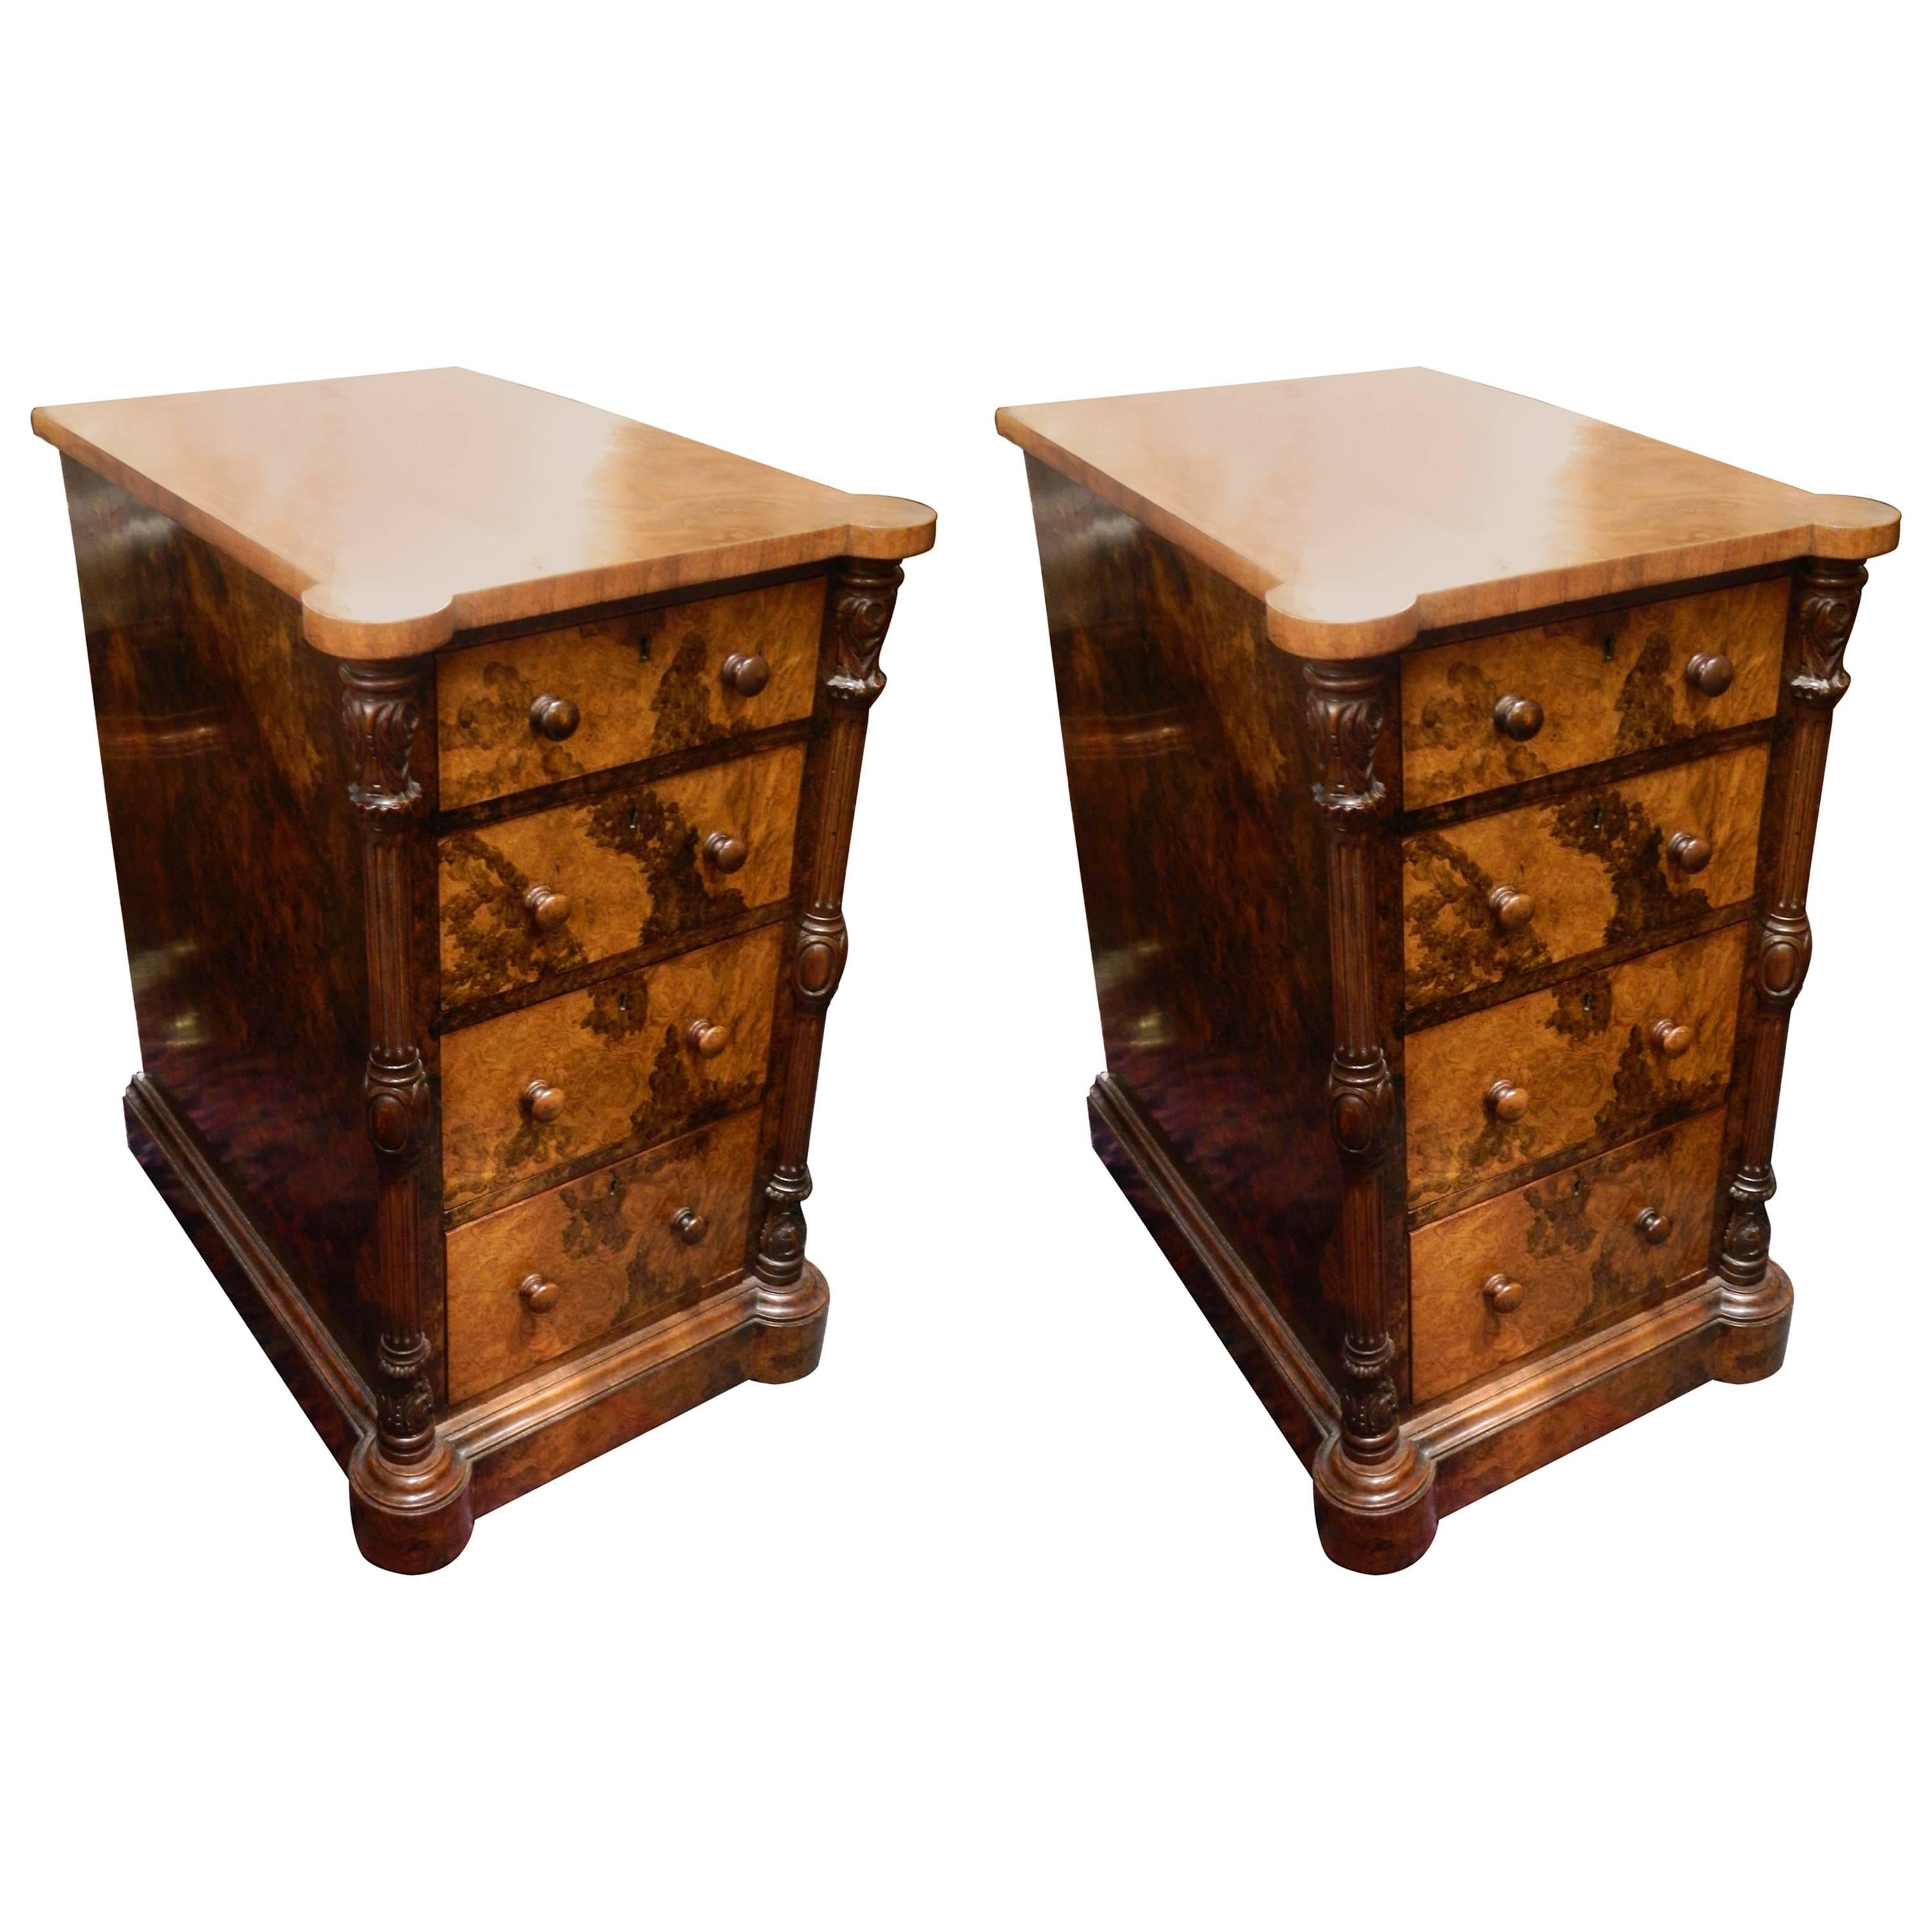 Pair of Burl Wood Nightstands on Casters, Early 20th Century